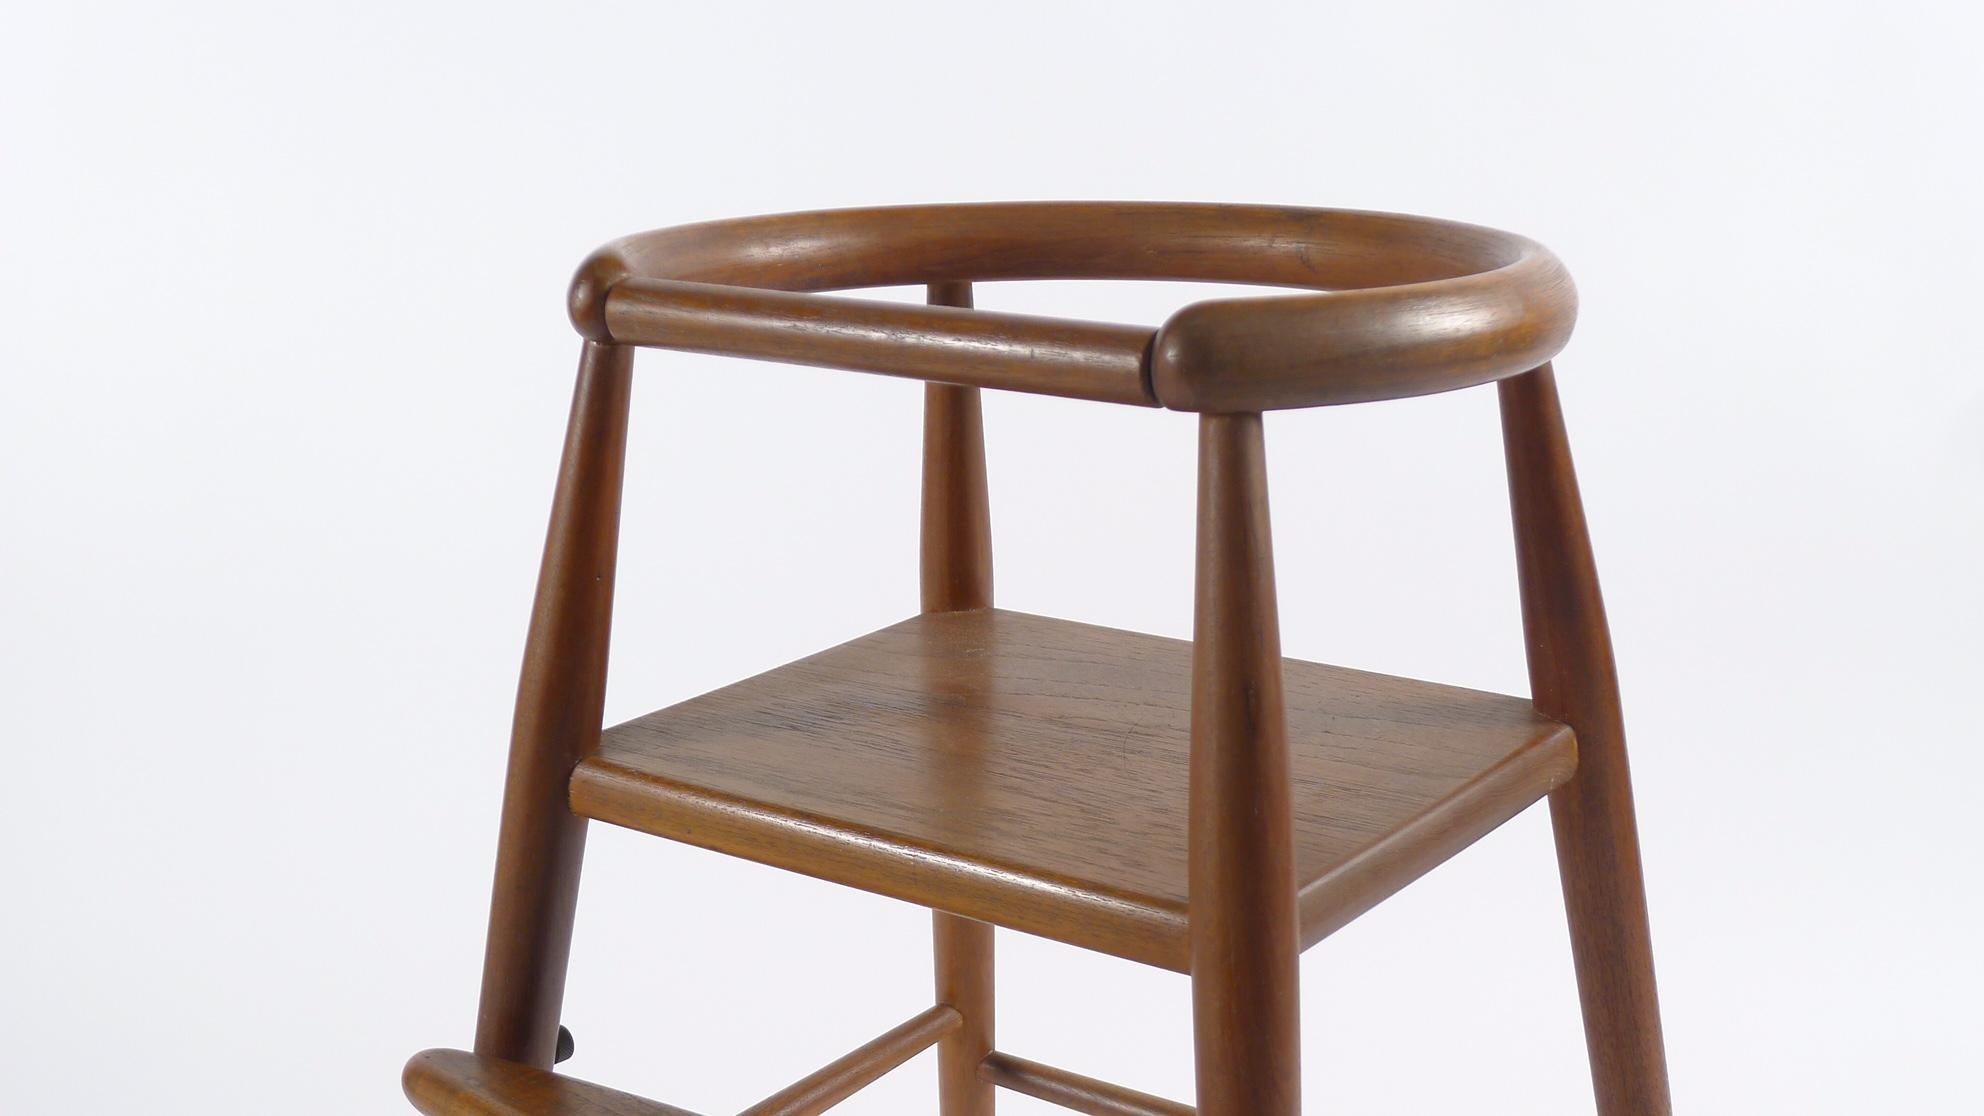 Nanna Ditzel Teak High Chair Stool, Danish 1960s with Label In Good Condition For Sale In Wargrave, Berkshire